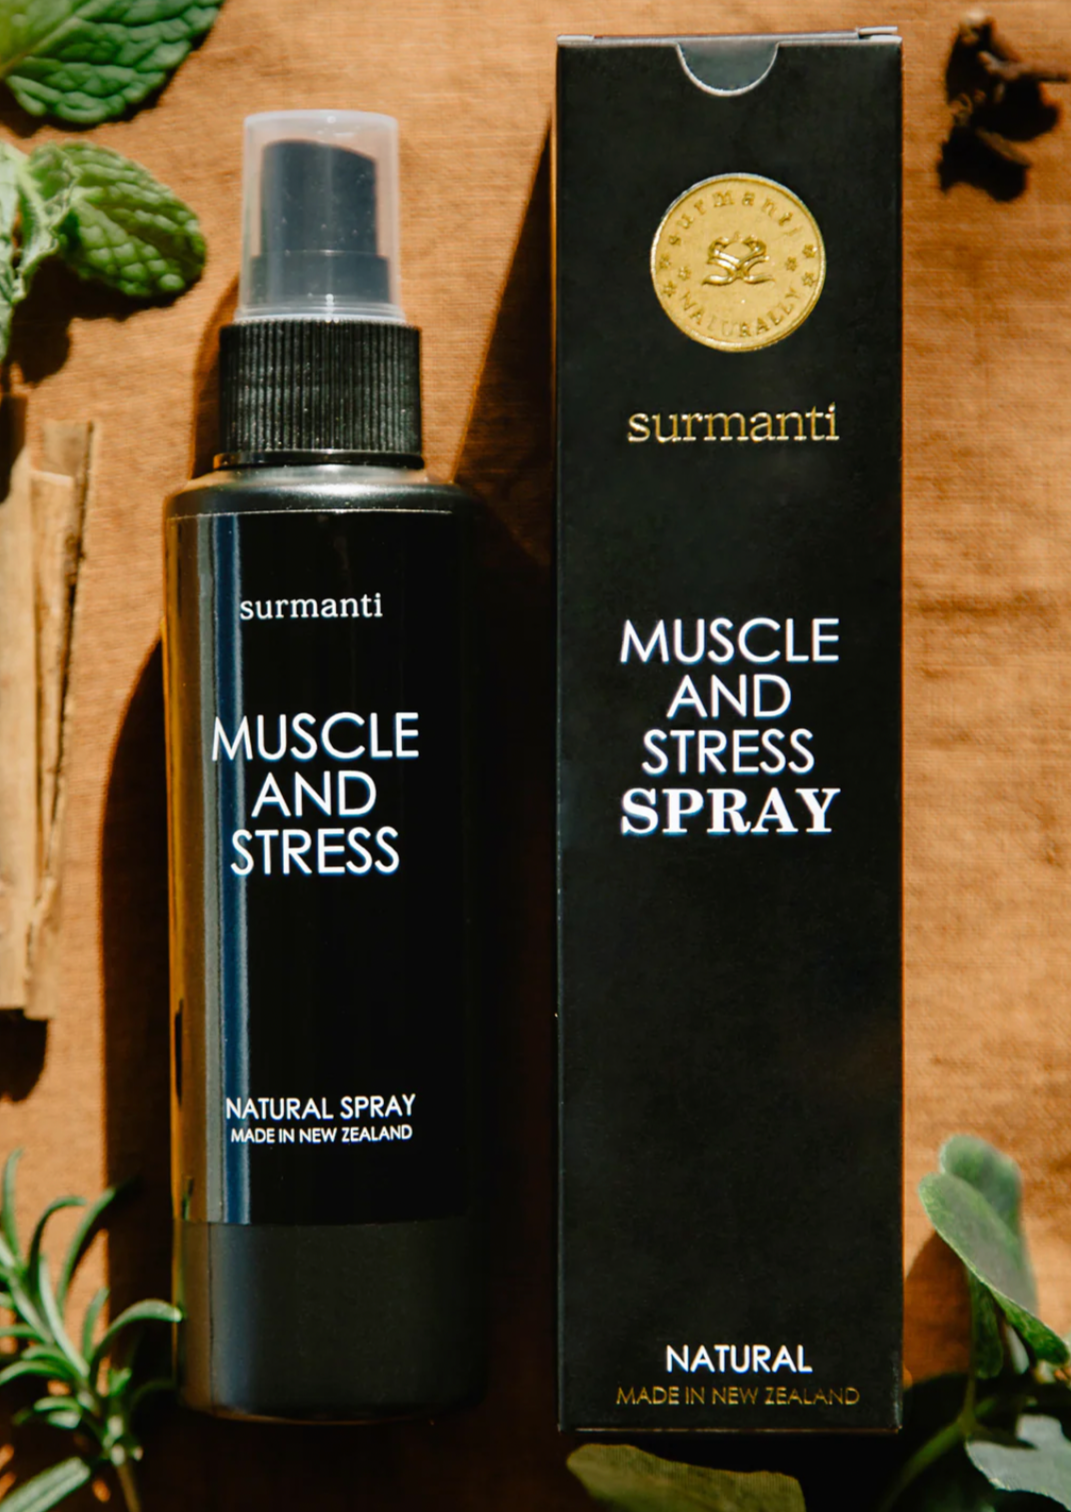 Surmanti MUSCLE & STRESS SPRAY - 30ml An anti-inflammatory muscle pain relief spray. This highly effective formula packed with deeply penetrating essential oils is one of our best-selling products at Surmanti.  Spray directly onto sore aching muscles and enjoy the warm tingling sensation, as tightness, tension, pressure, and fatigue are released from your body.  Make health and wellbeing a priority by indulging in the euphoric aroma of our Muscle & Stress Spray.